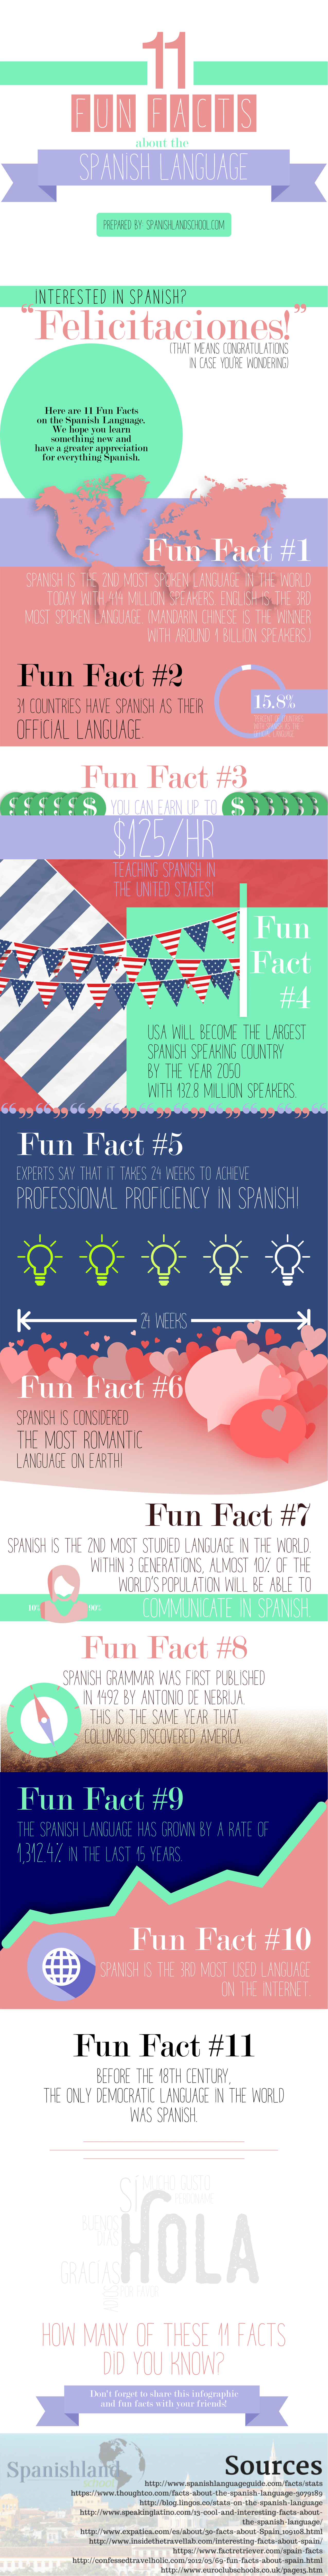 Fun Facts About Spanish - Infographic